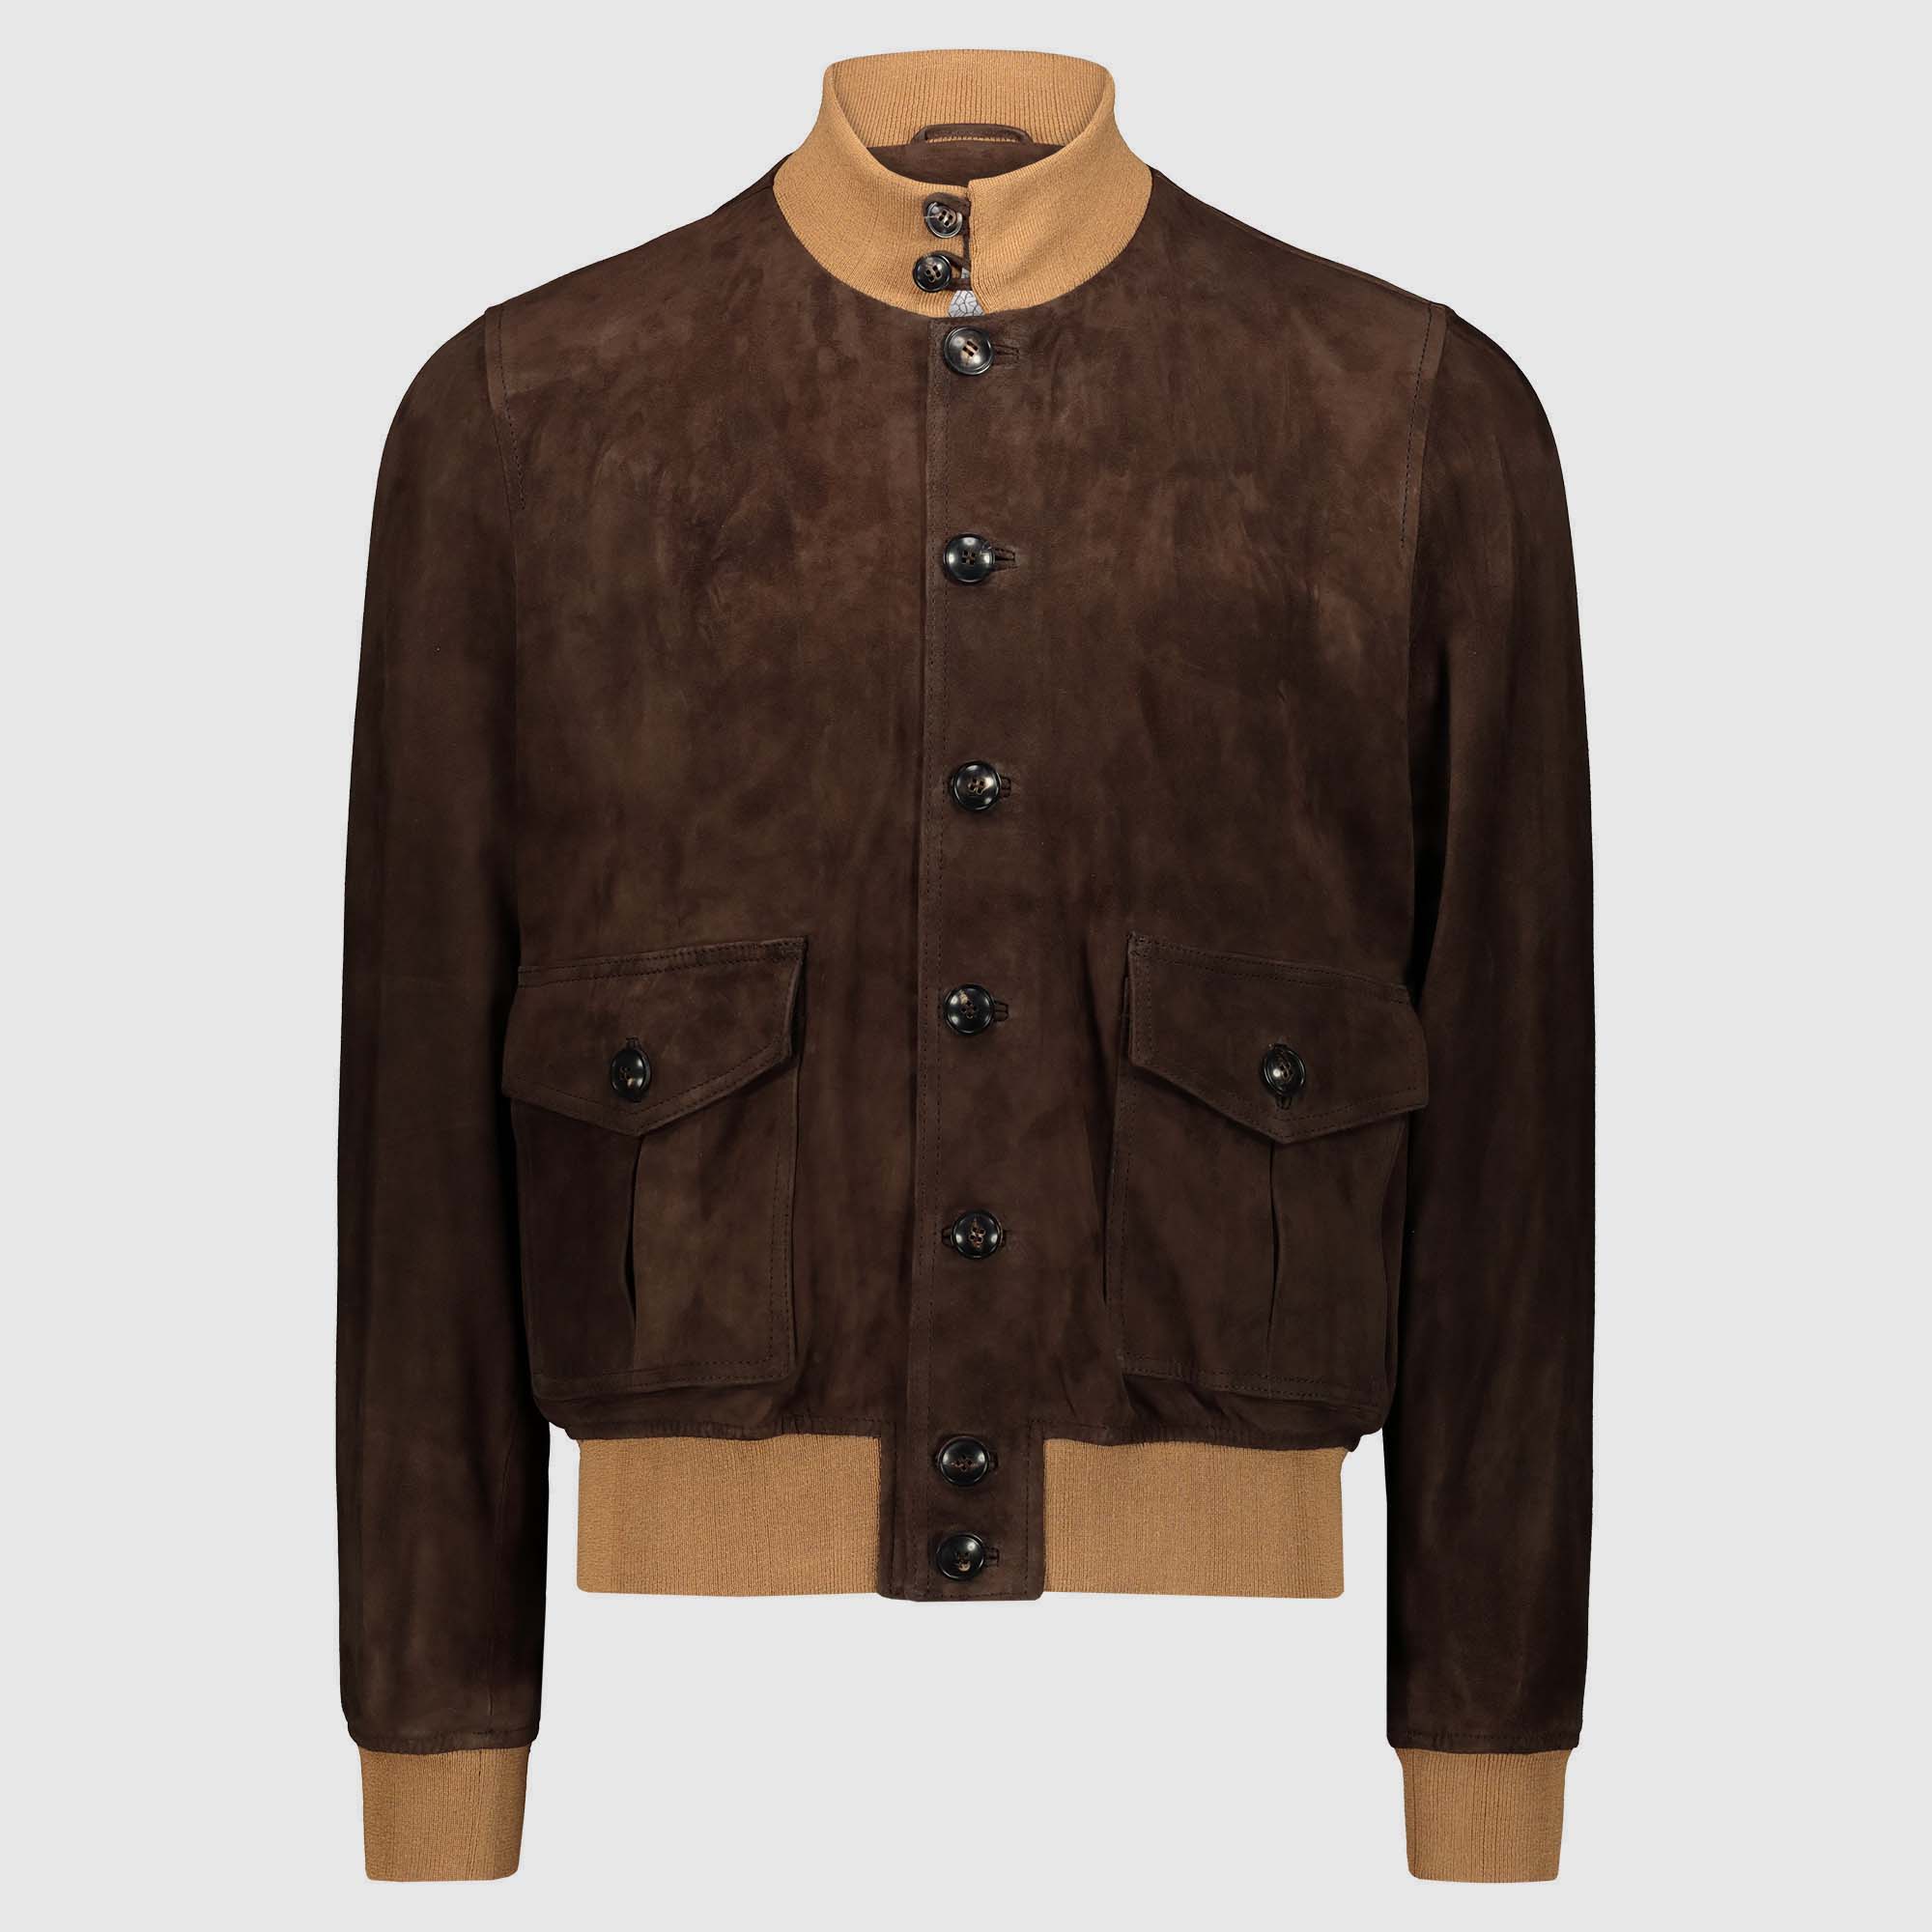 Brown suede & Woodsmoke details Bomber Jacket A1 Cary – 58